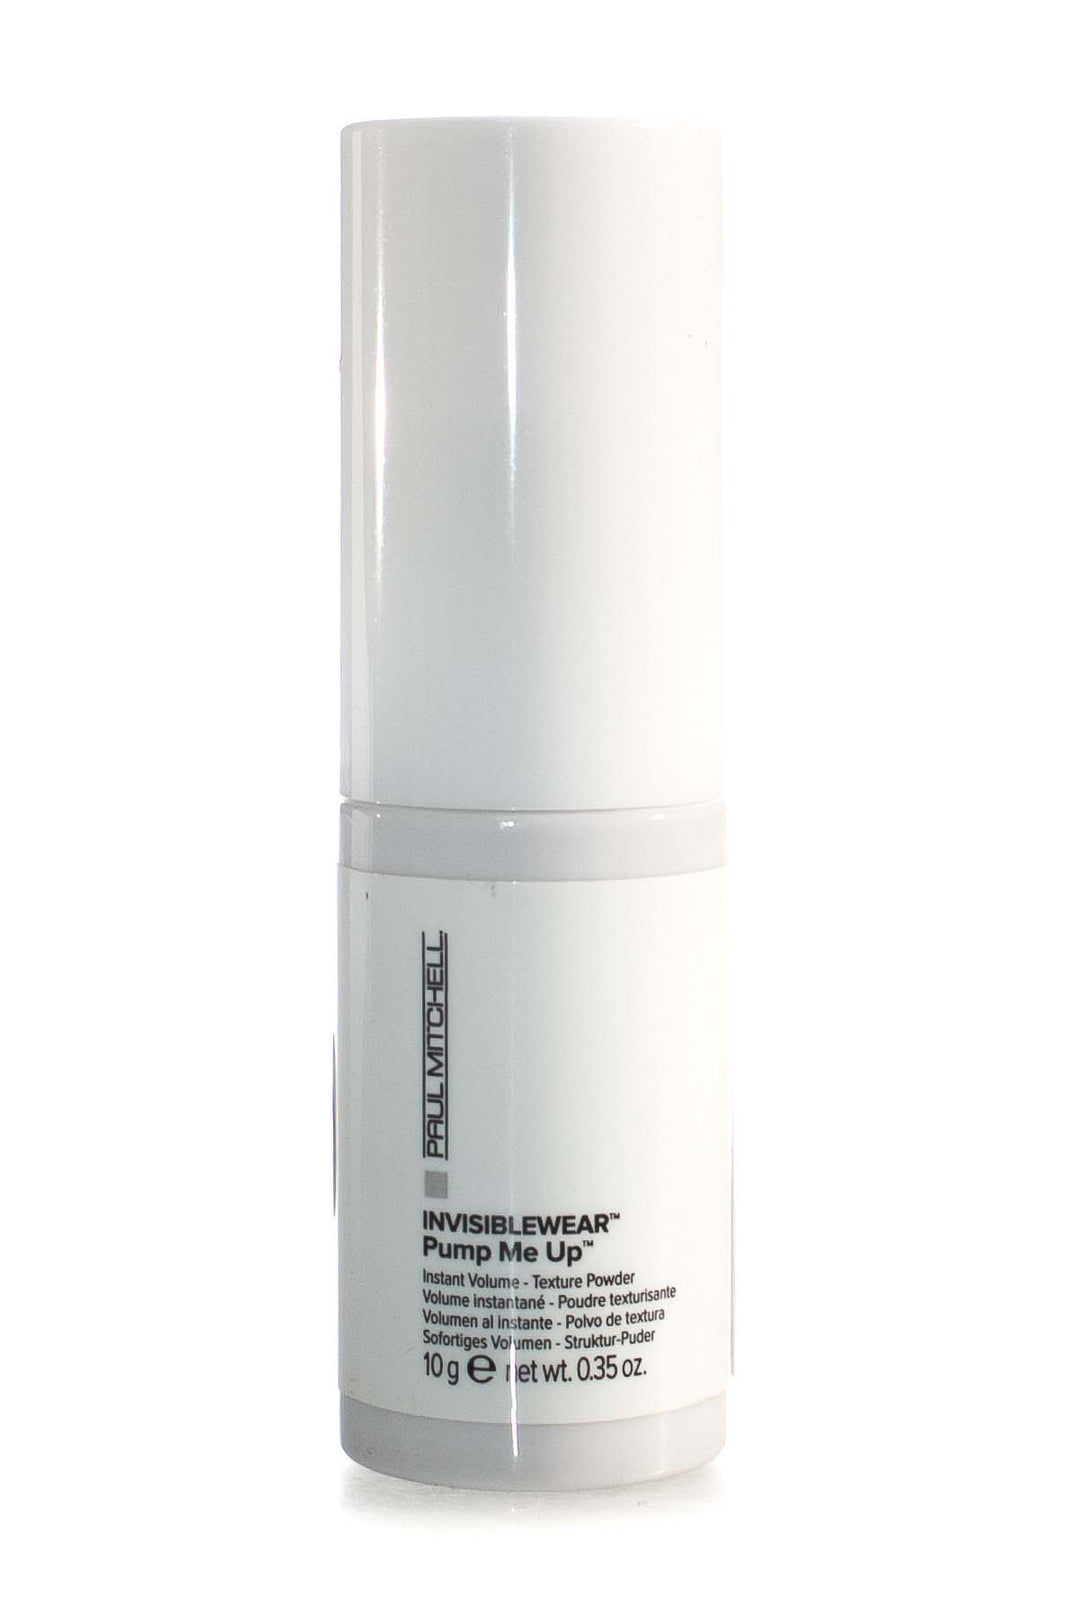 paul-mitchell-invisiblewear-pump-me-up-10g